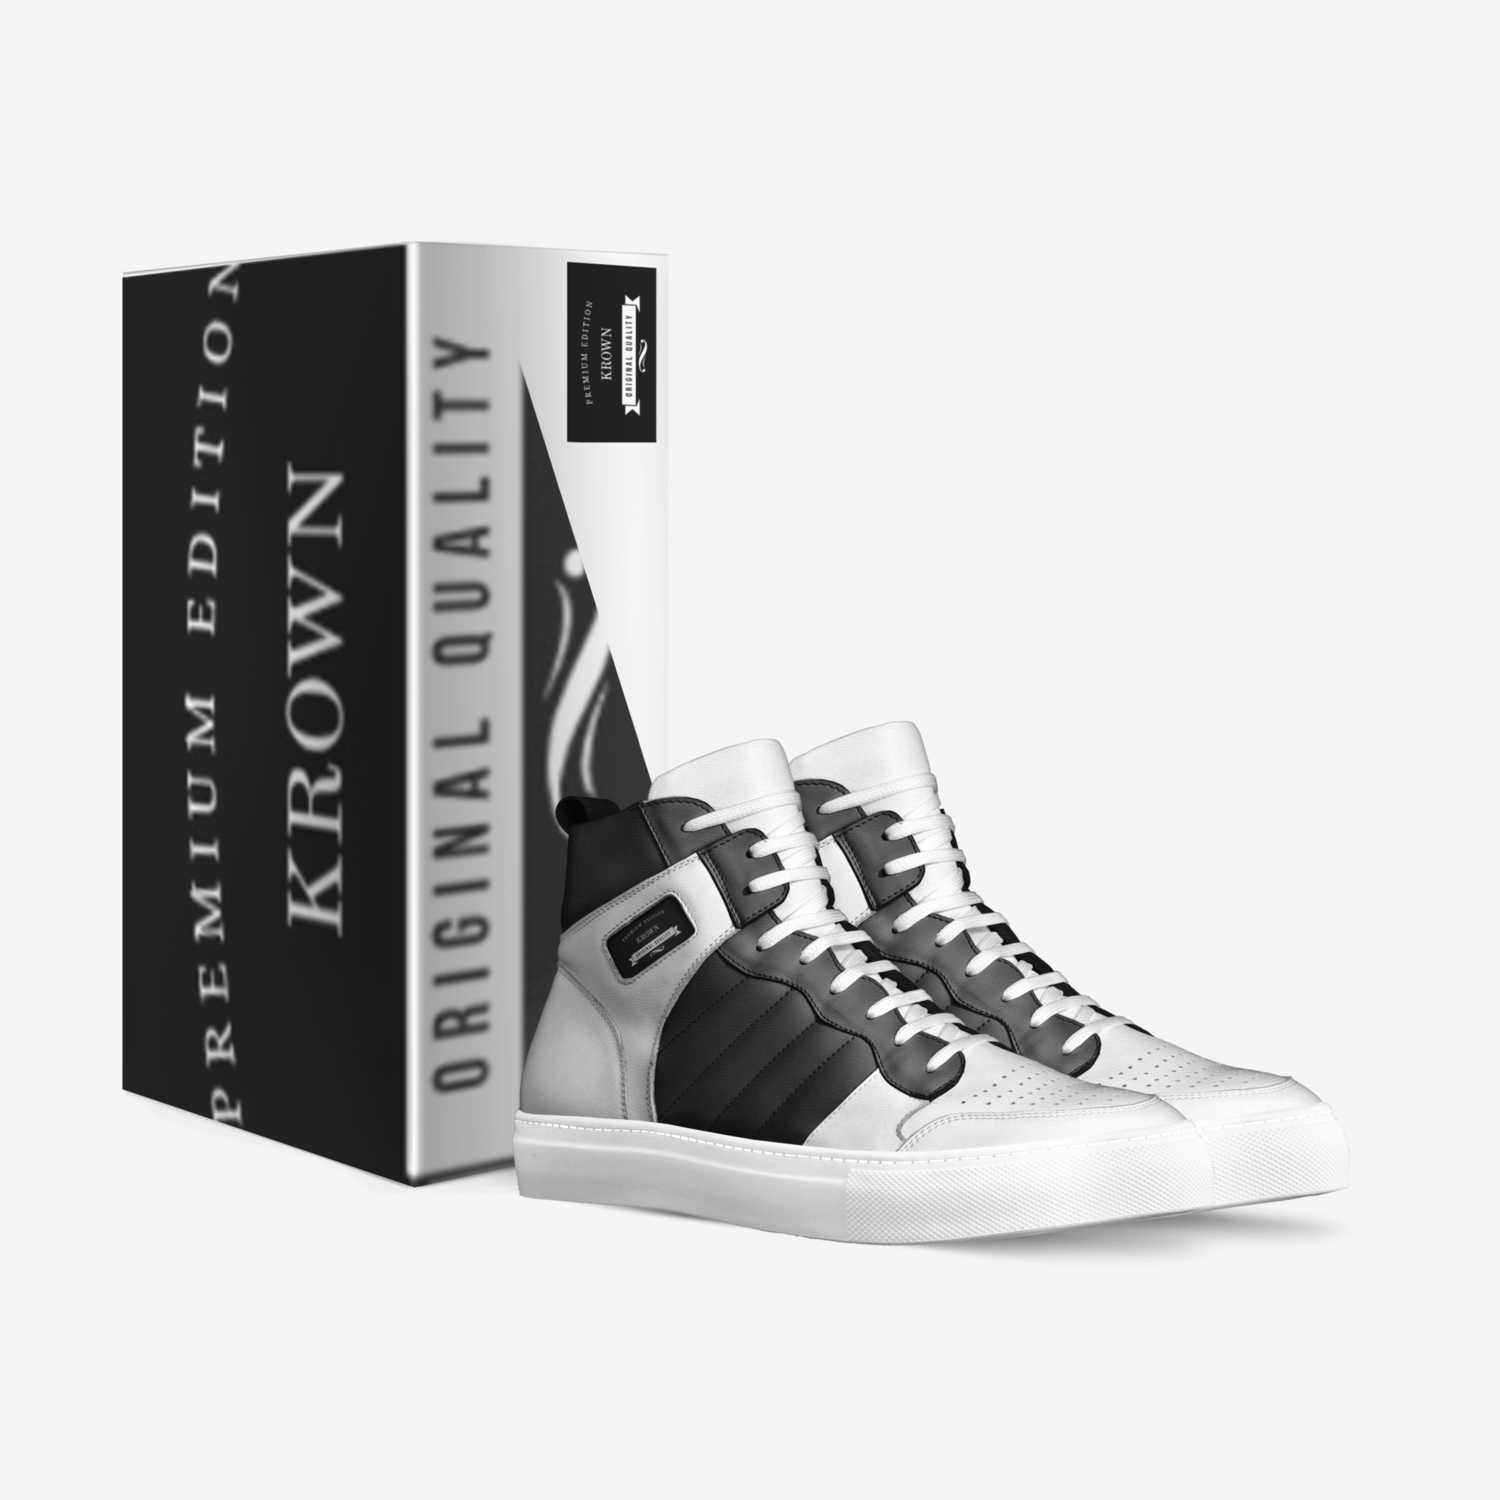 Krown custom made in Italy shoes by William Wilkins | Box view